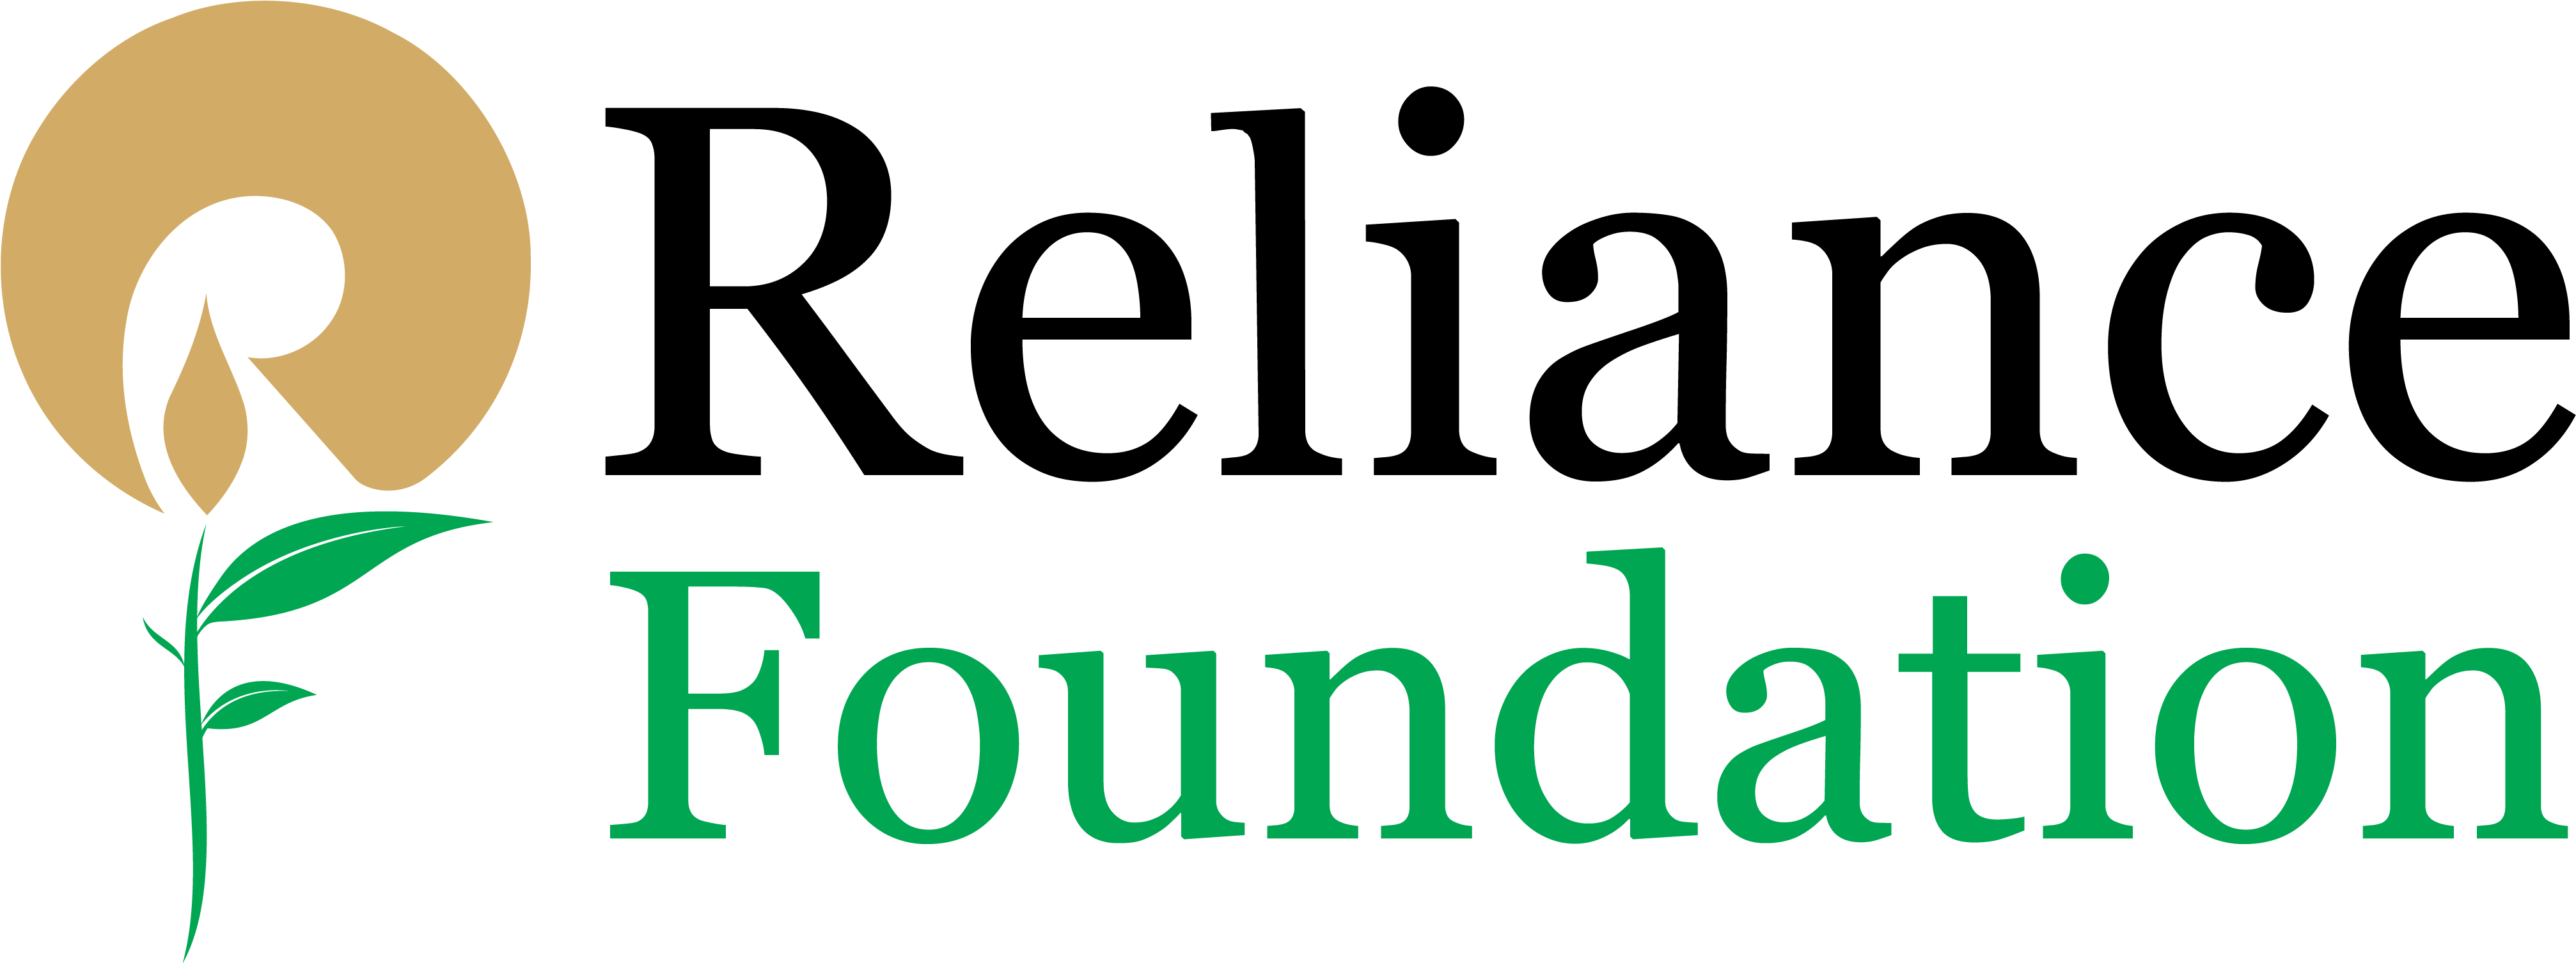 Reliance_Foundation_Logo.png